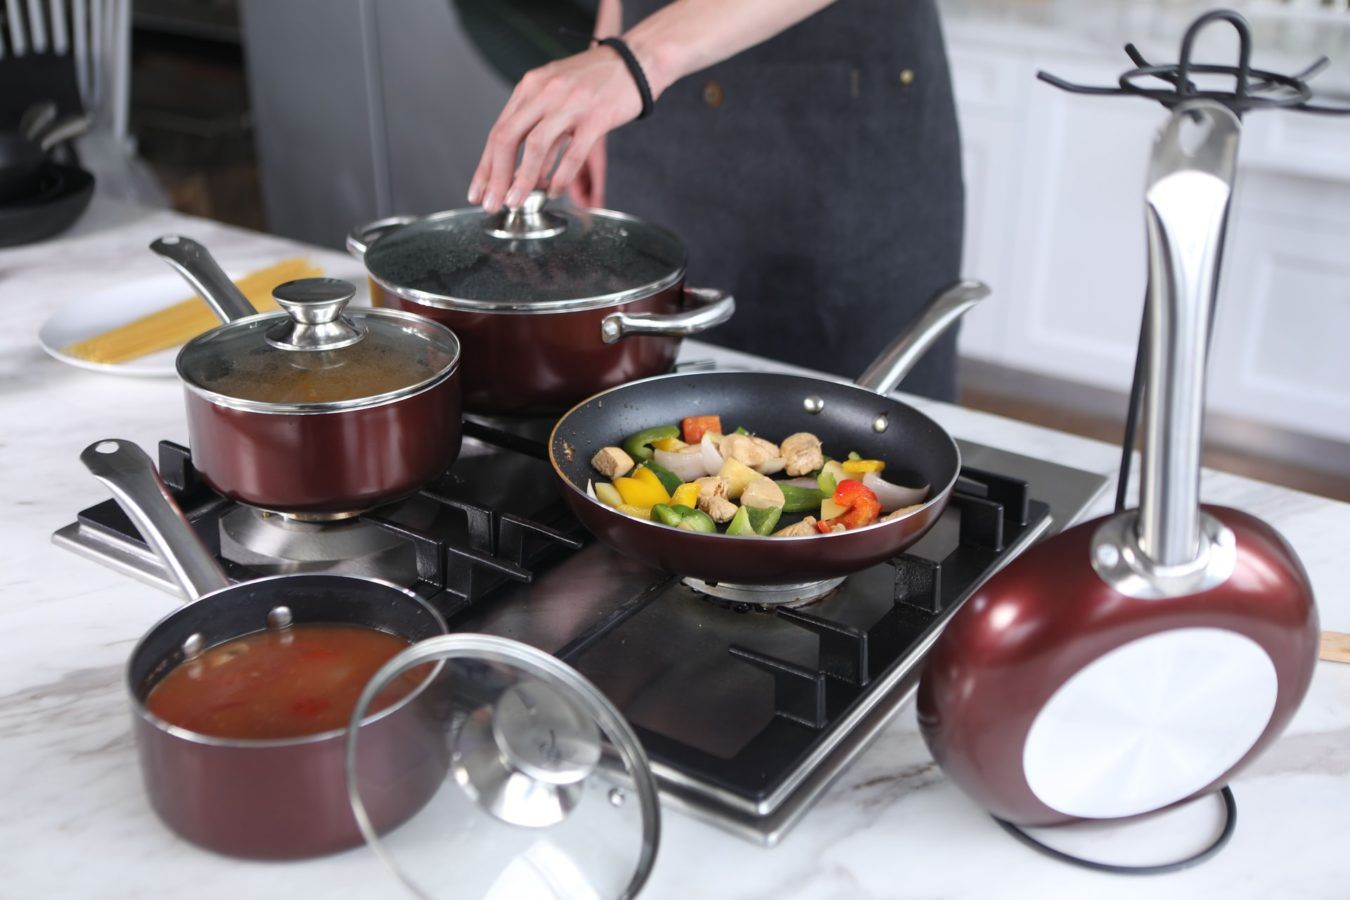 Top cookware brands to cook a Christmas feast in